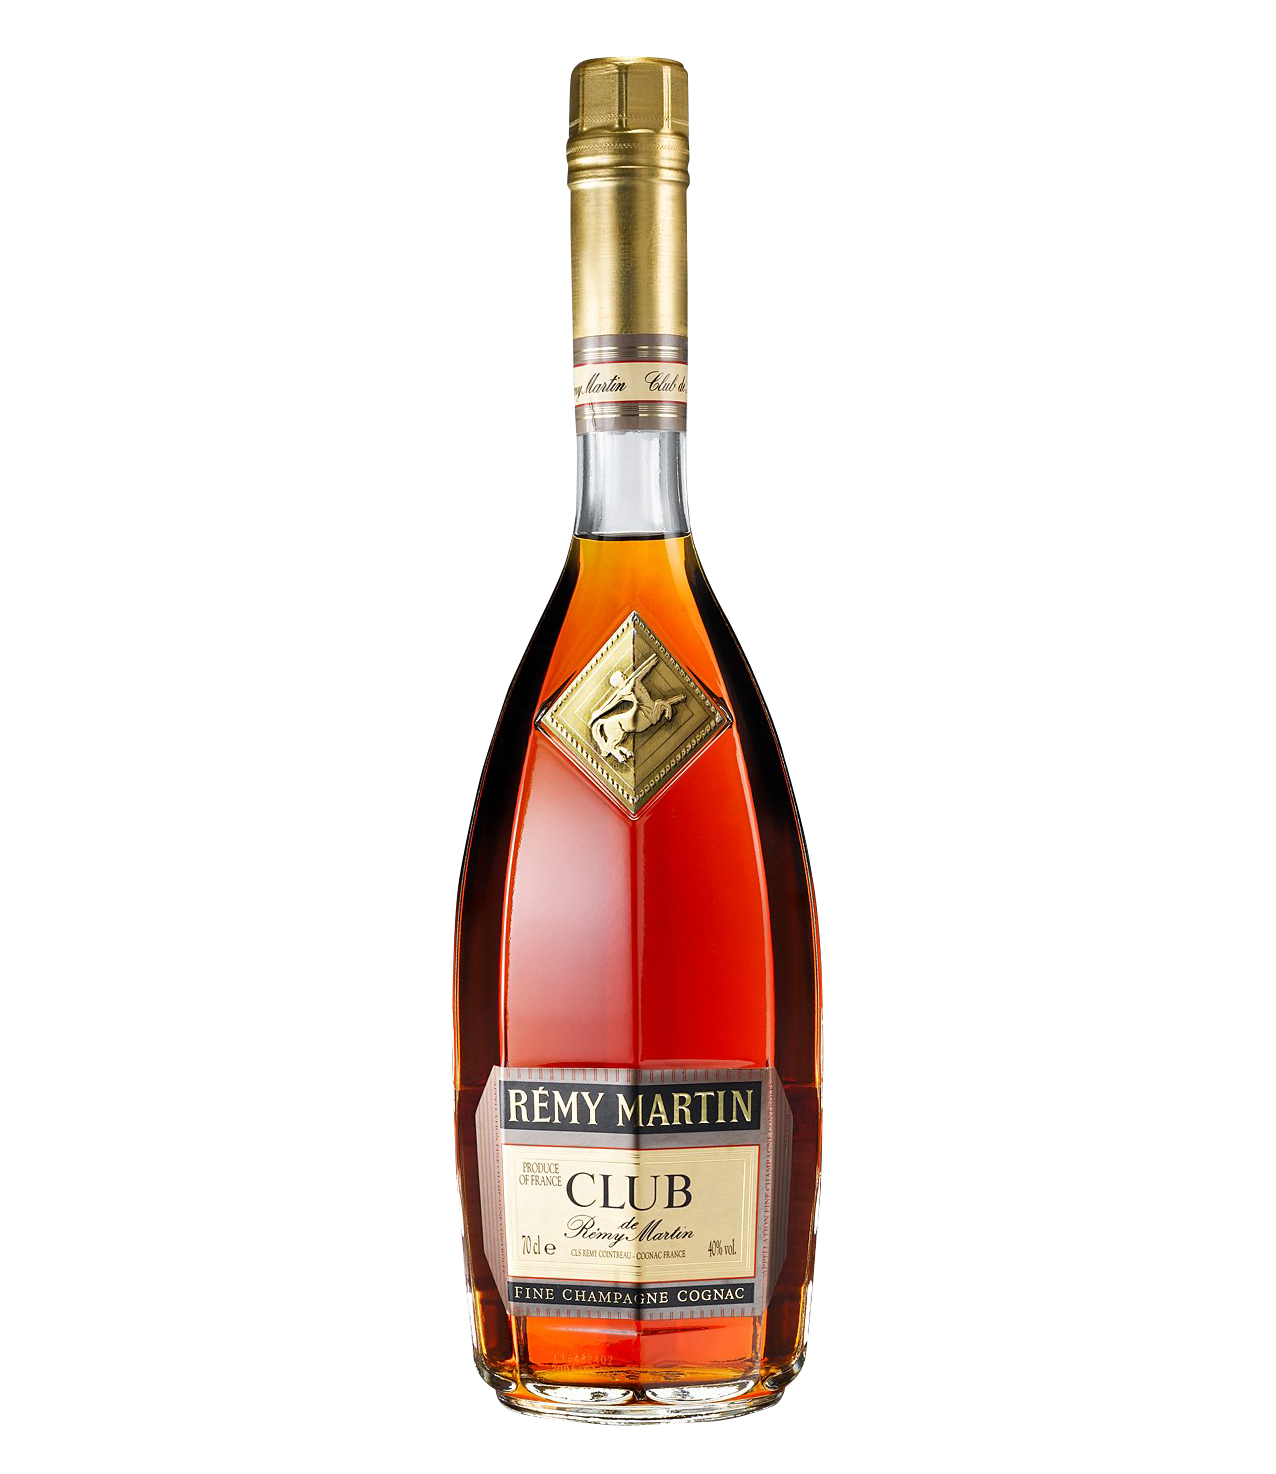 remy-martin-club-brand-filled-glass-bottle-png-image-free-download-25